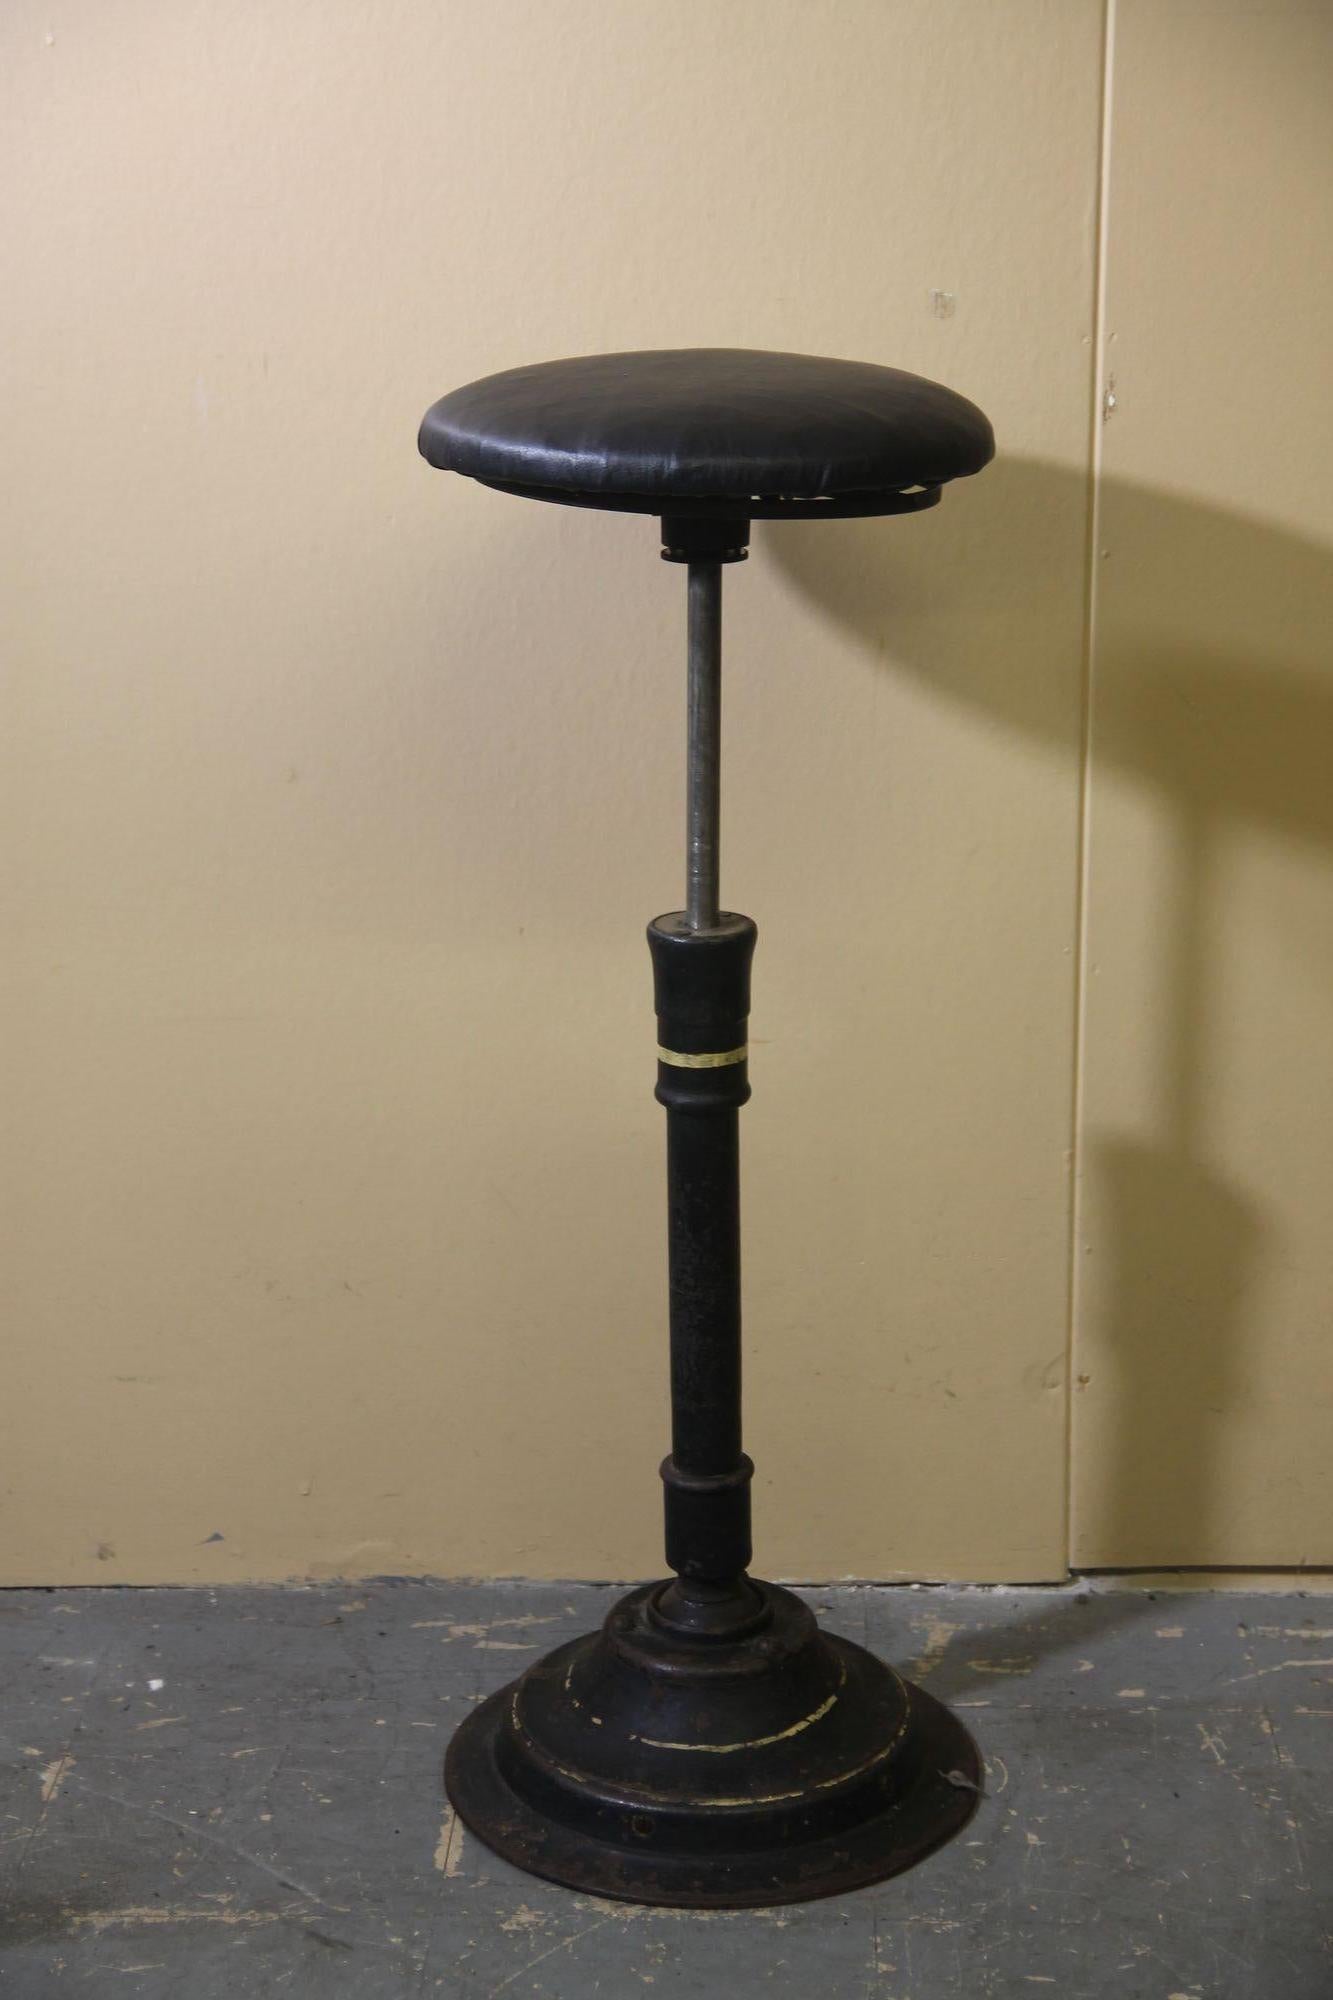 Pleased to offer this great adjustable stool. The stool height goes from 23 inches to 30 inches. Also the stool sits on a ball joint so you can lean the stool in many directions while you are seated on it. Not many of these come to market.